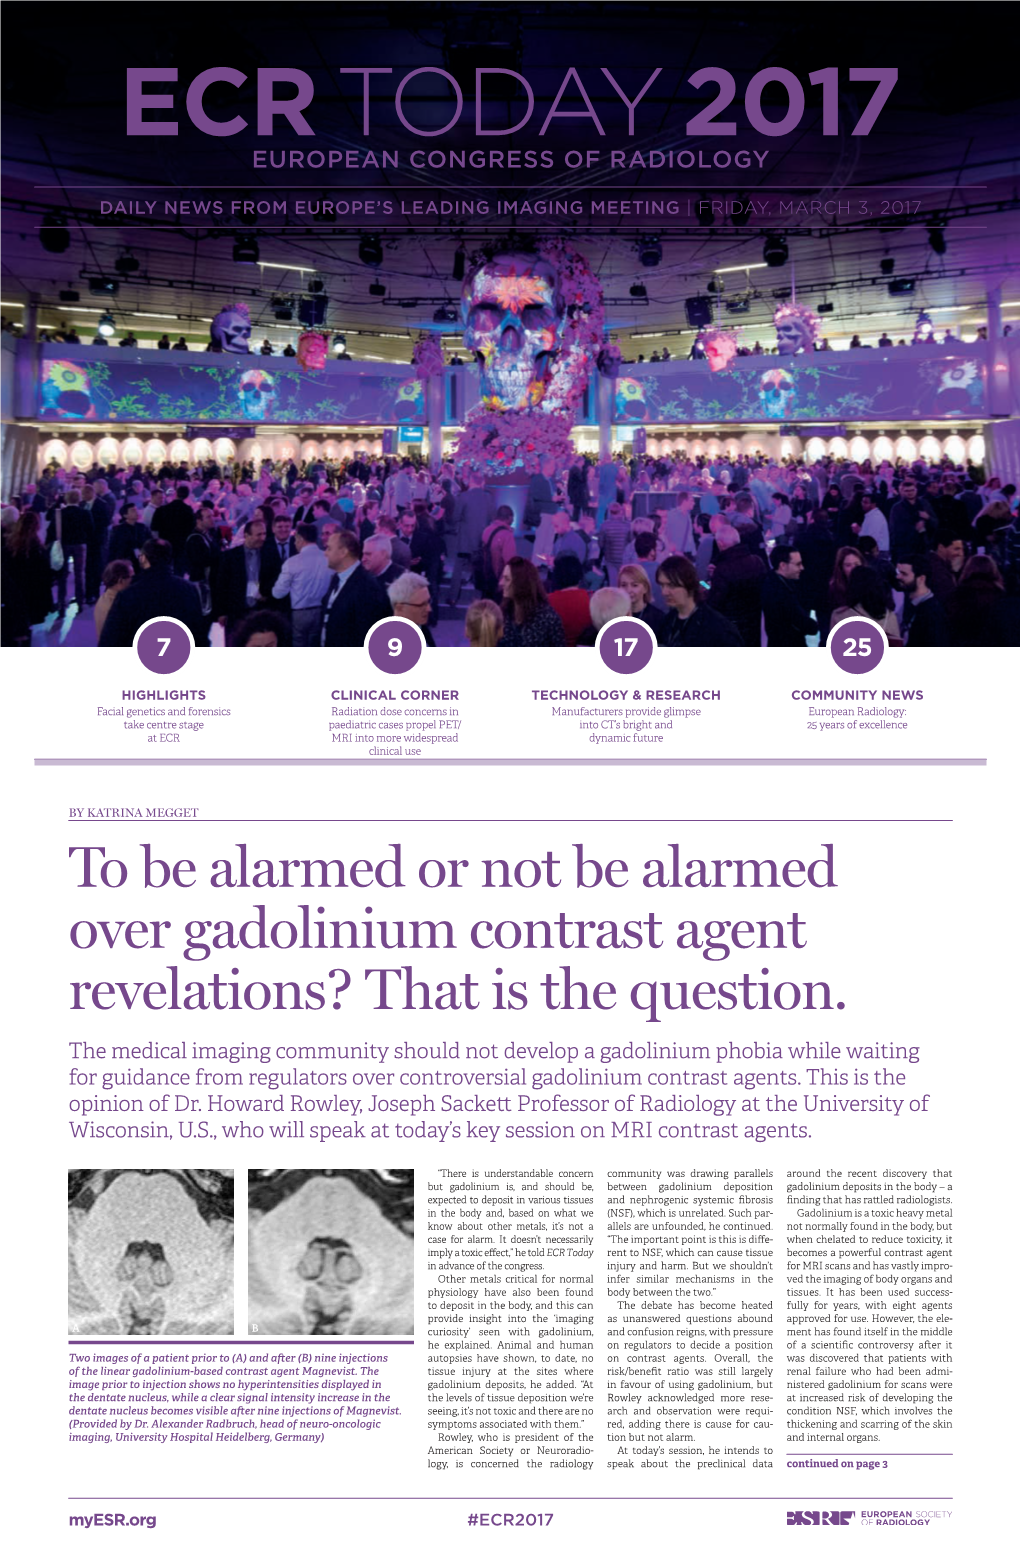 To Be Alarmed Or Not Be Alarmed Over Gadolinium Contrast Agent Revelations? That Is the Question